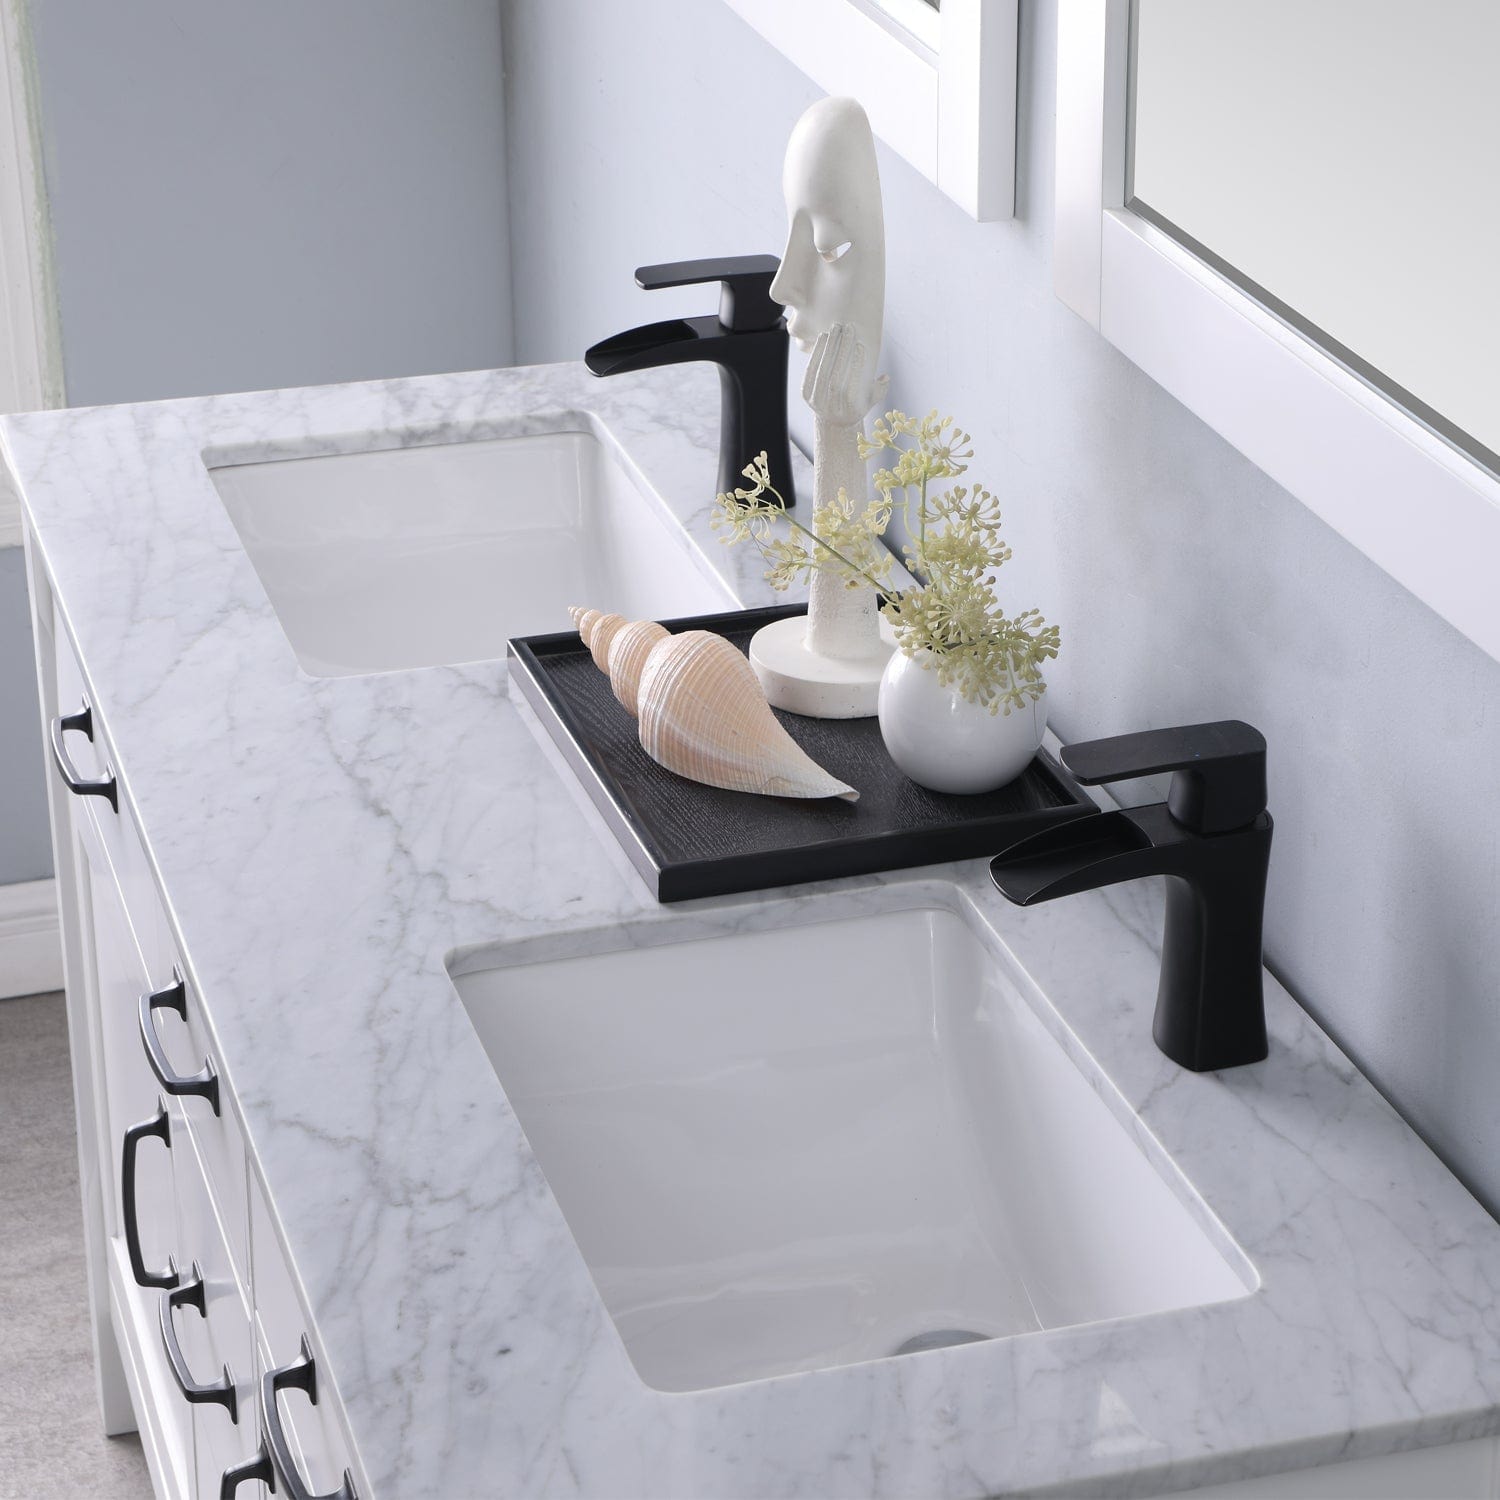 Altair Maribella 60" Double Bathroom Vanity Set in White and Carrara White Marble Countertop with Mirror 535060-WH-CA - Molaix631112970372Vanity535060-WH-CA